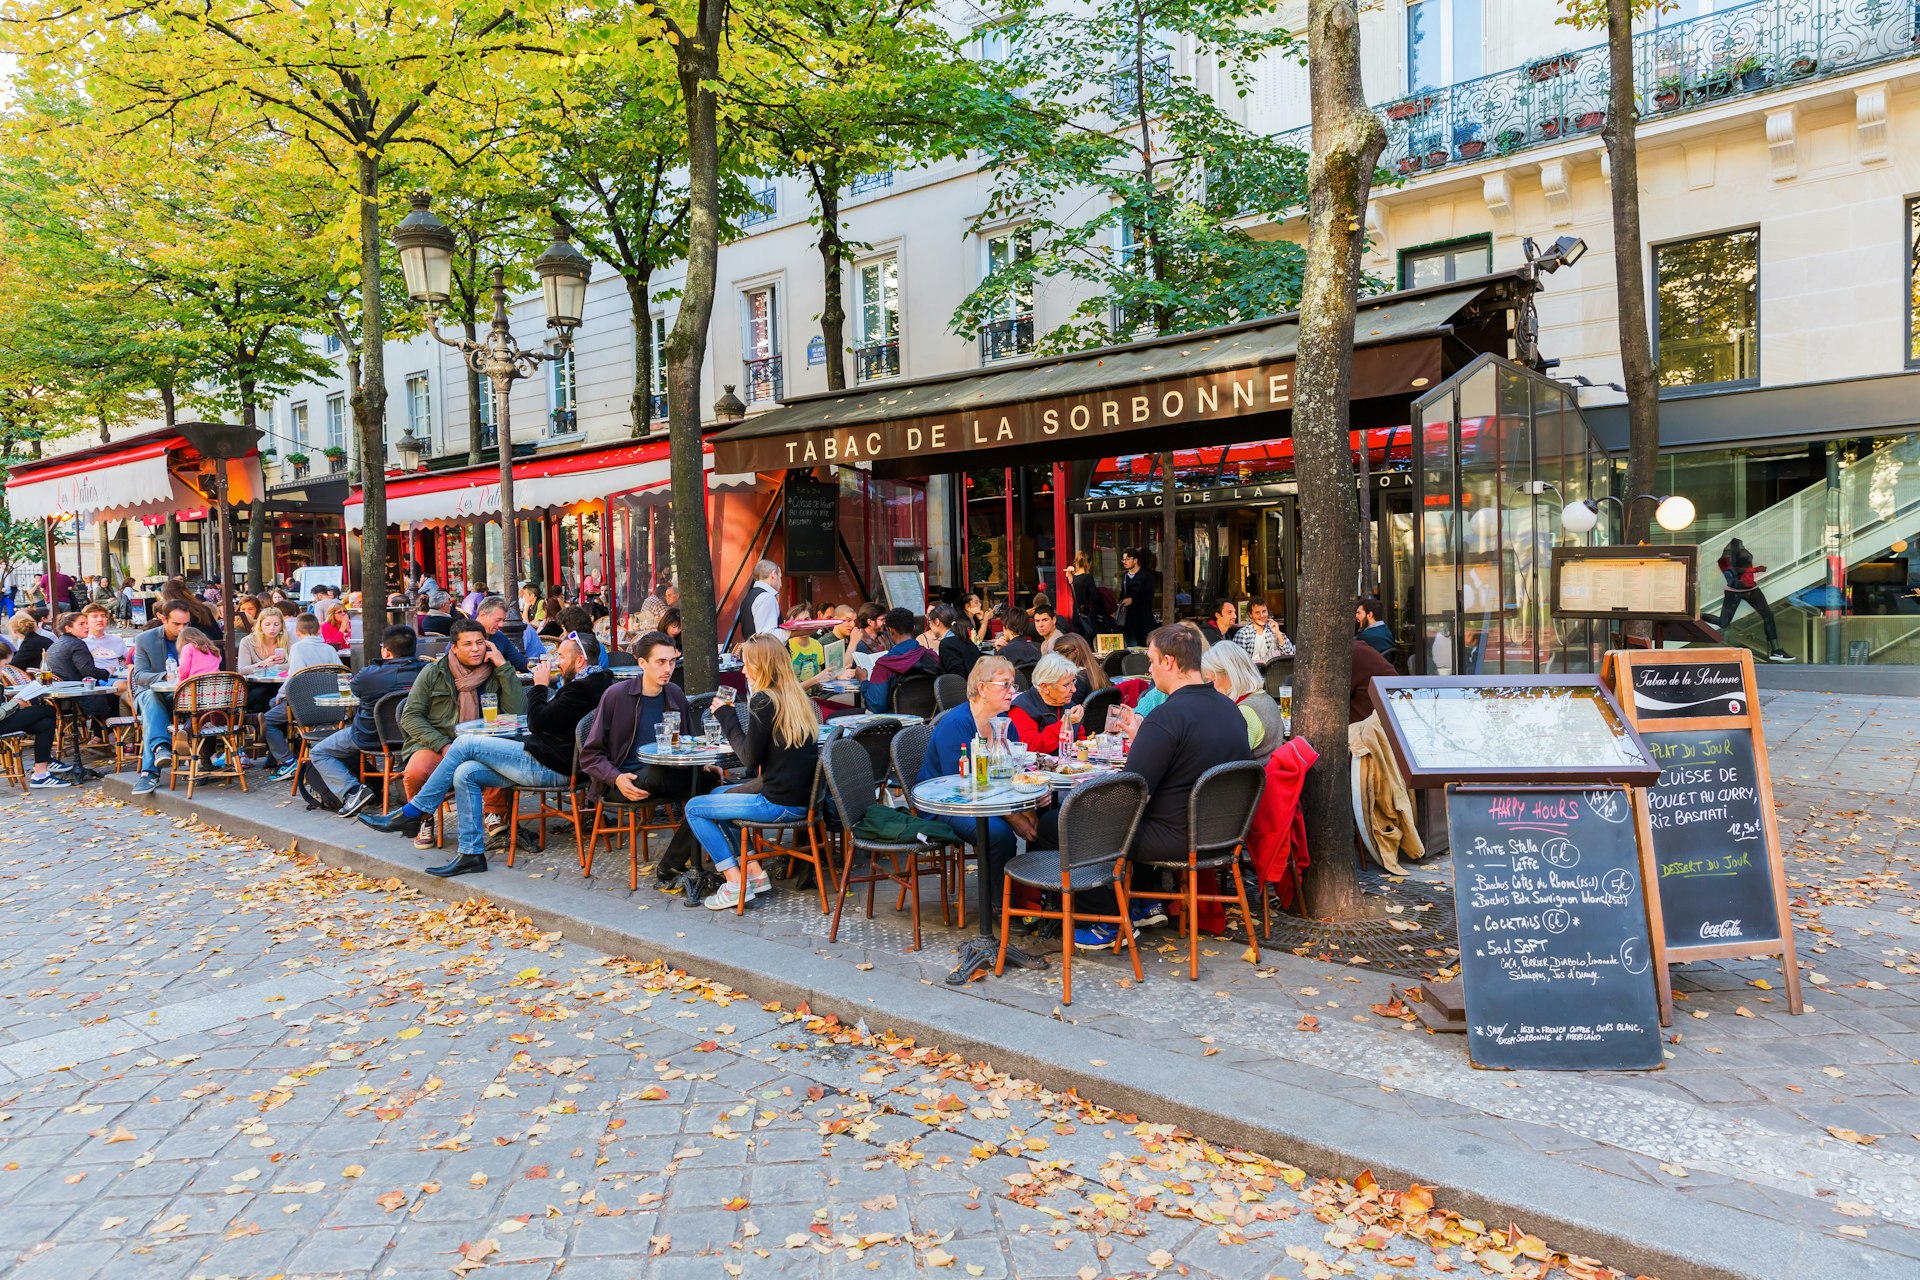 People sat at tables on a pavement outside a cafe